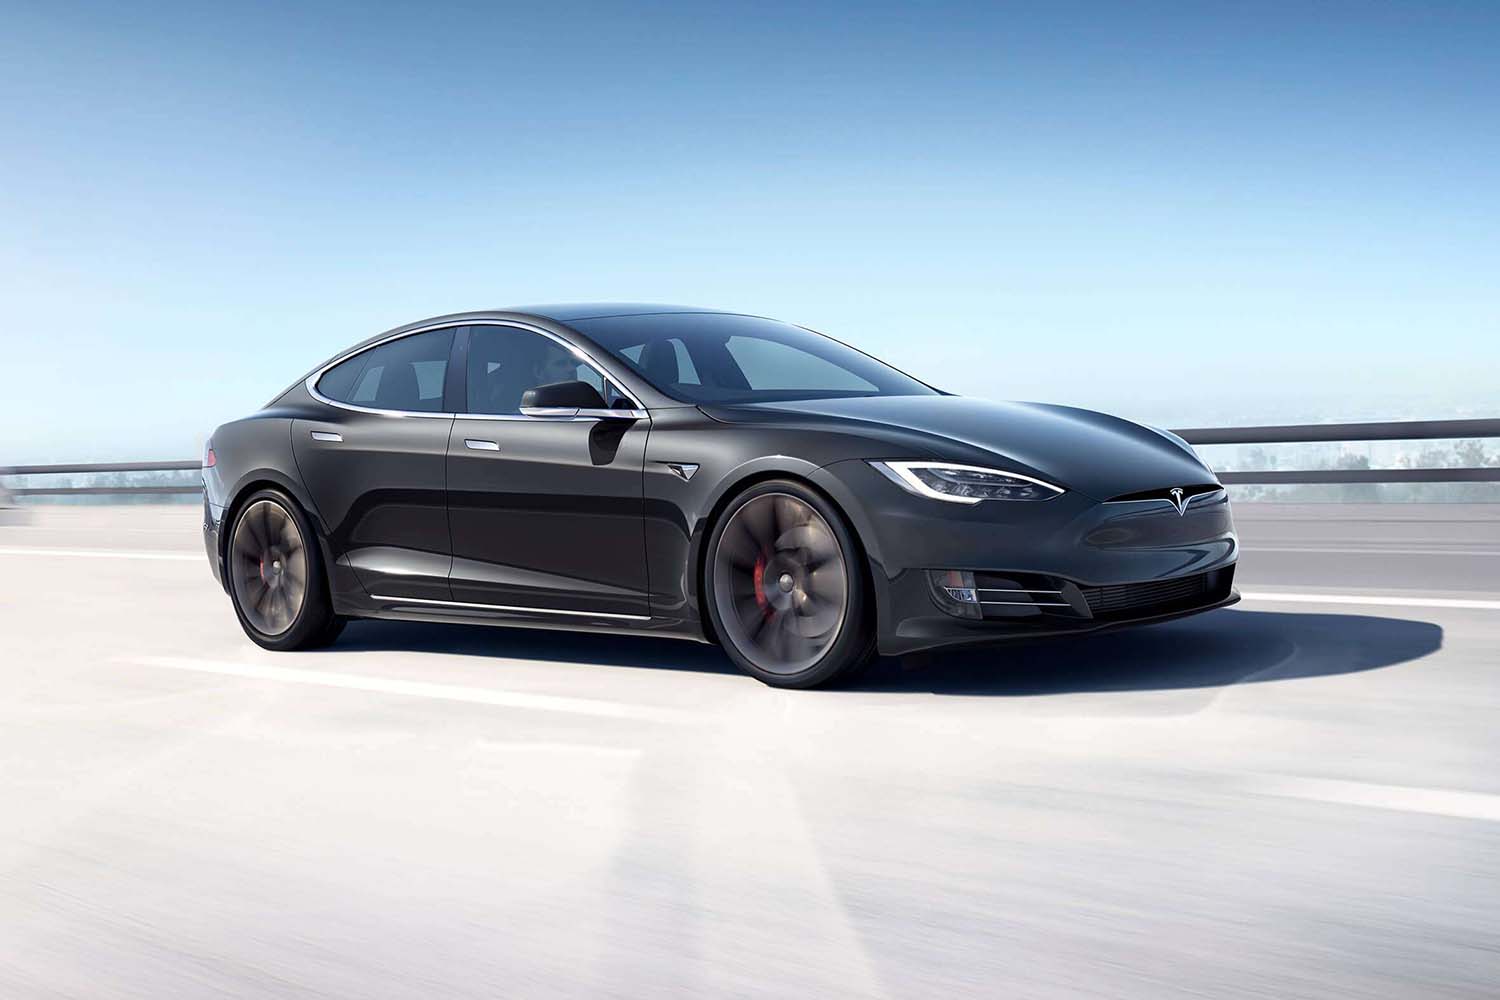 Top 10 Sustainable Luxury Cars for 2020: Tesla Model S